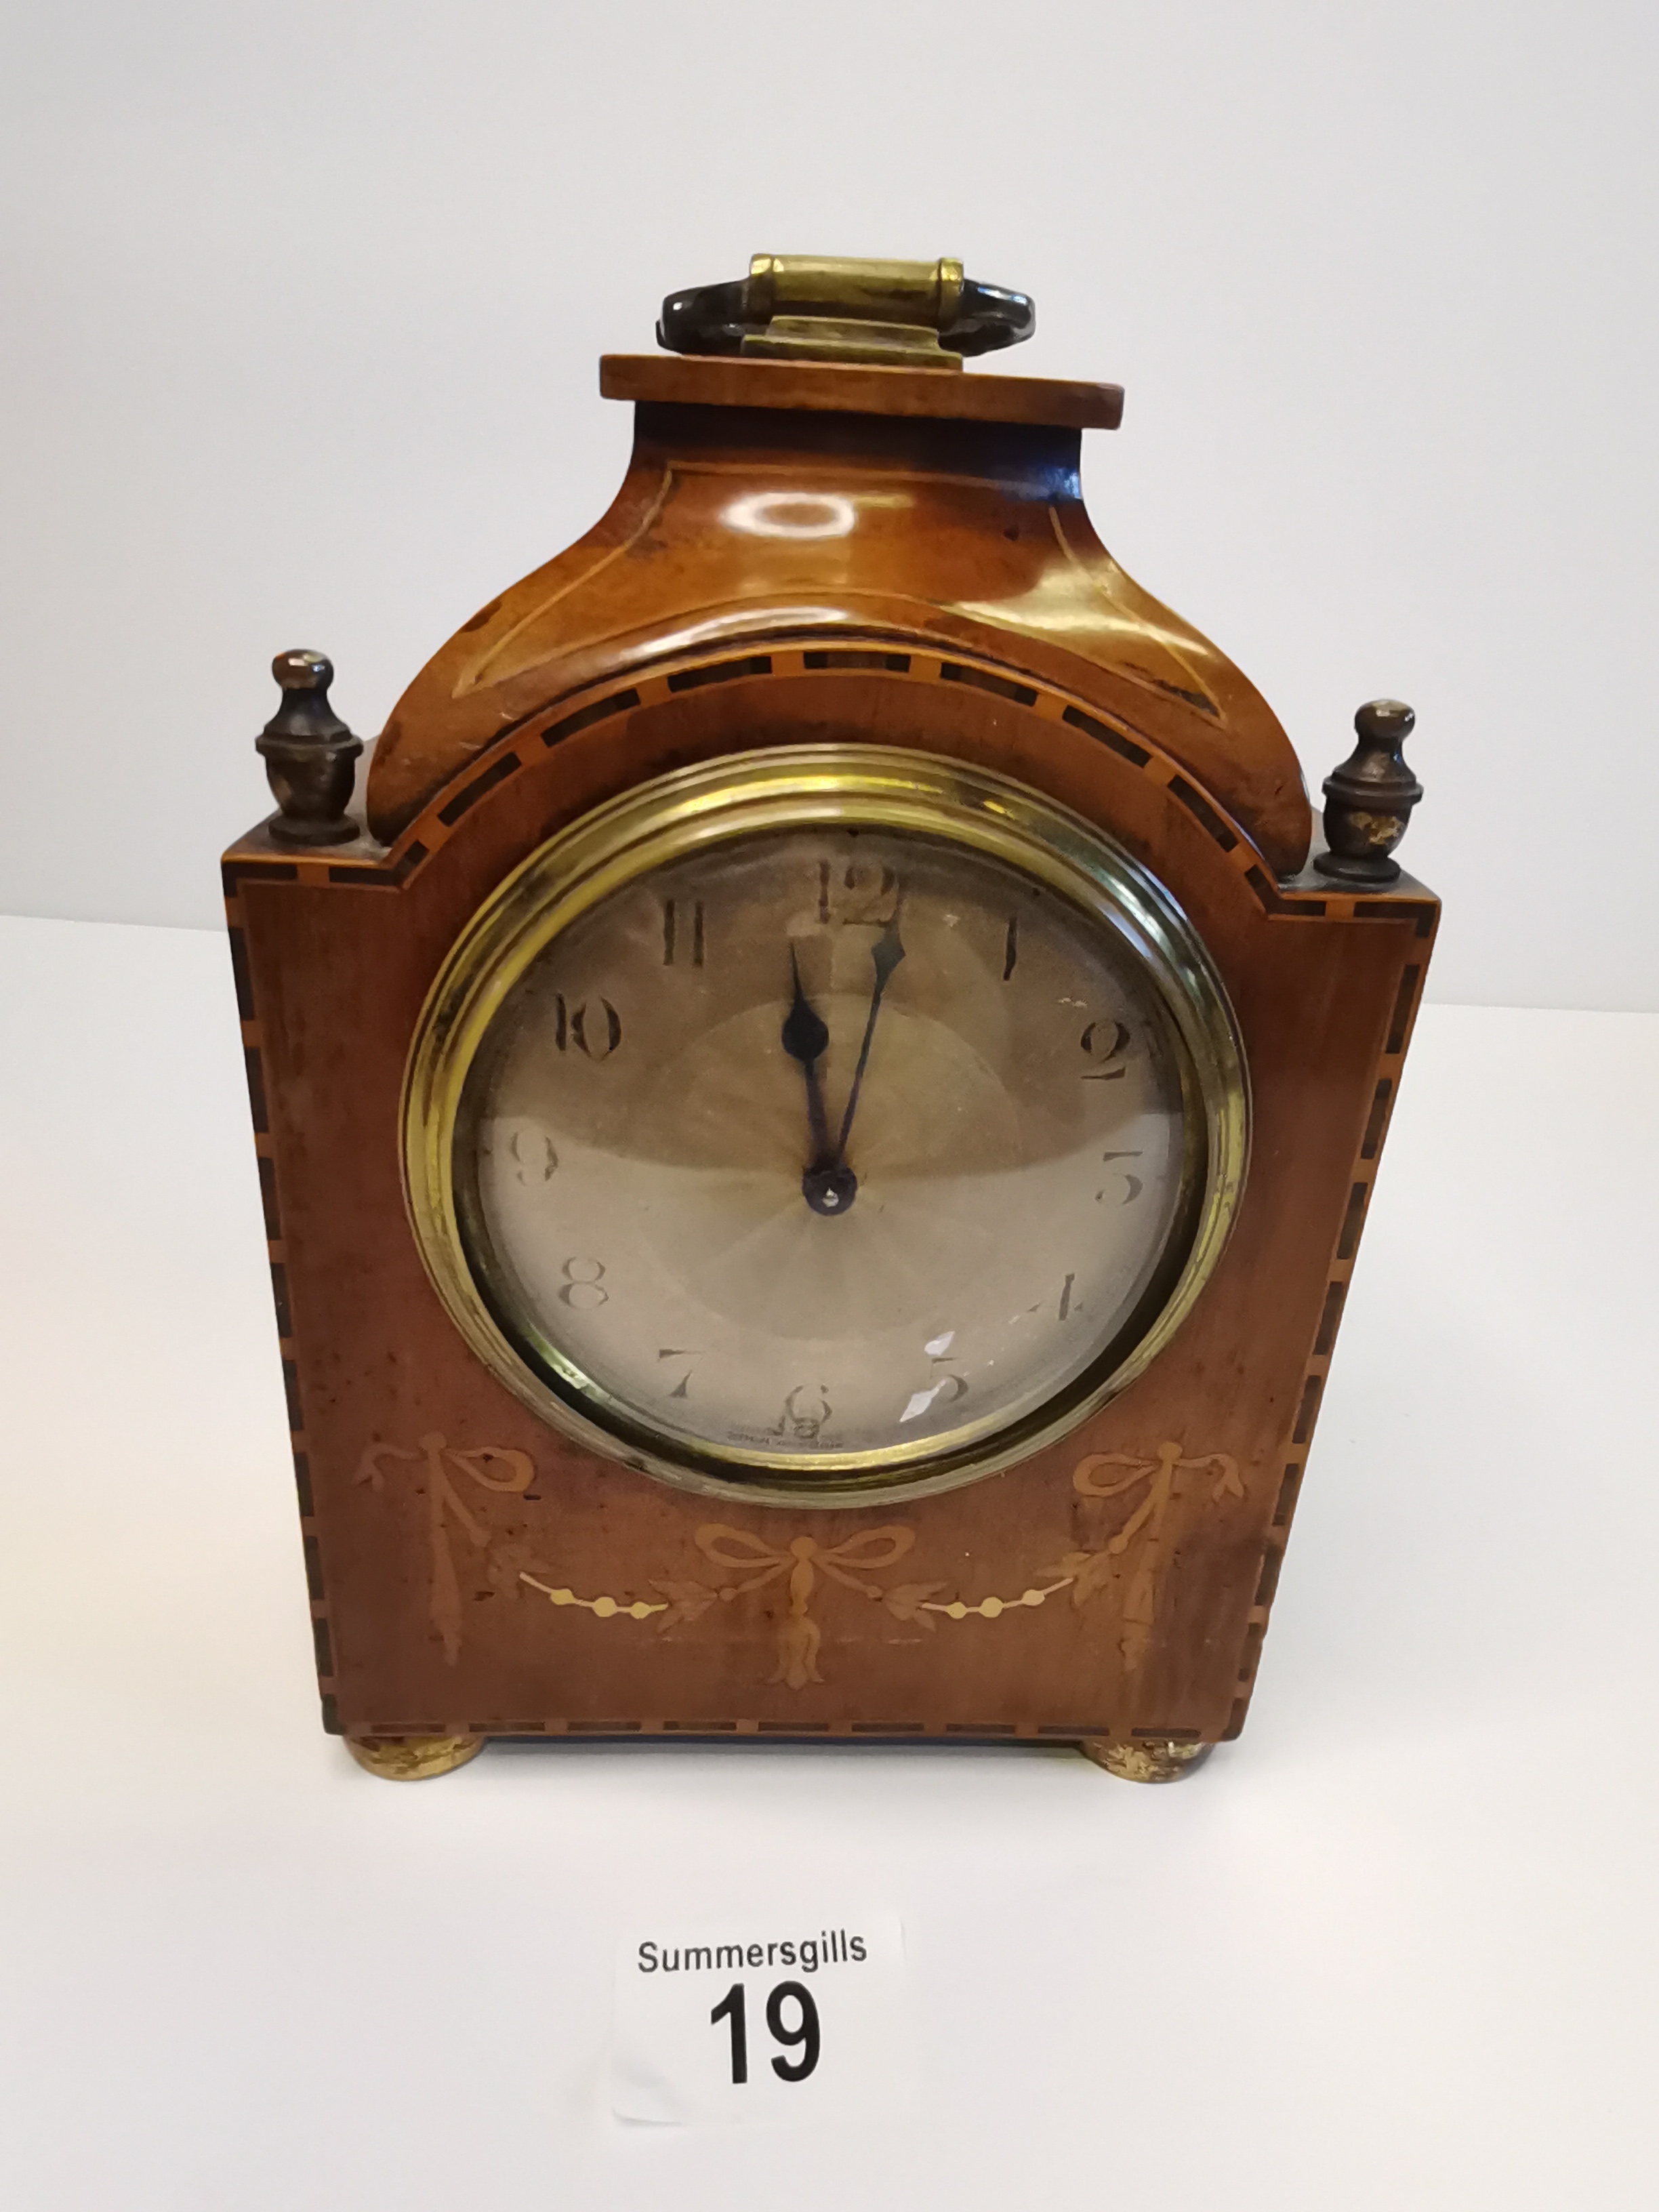 A quality Antique Inlaid Mahogany Mantle Clock with Key and Ribbon decoration